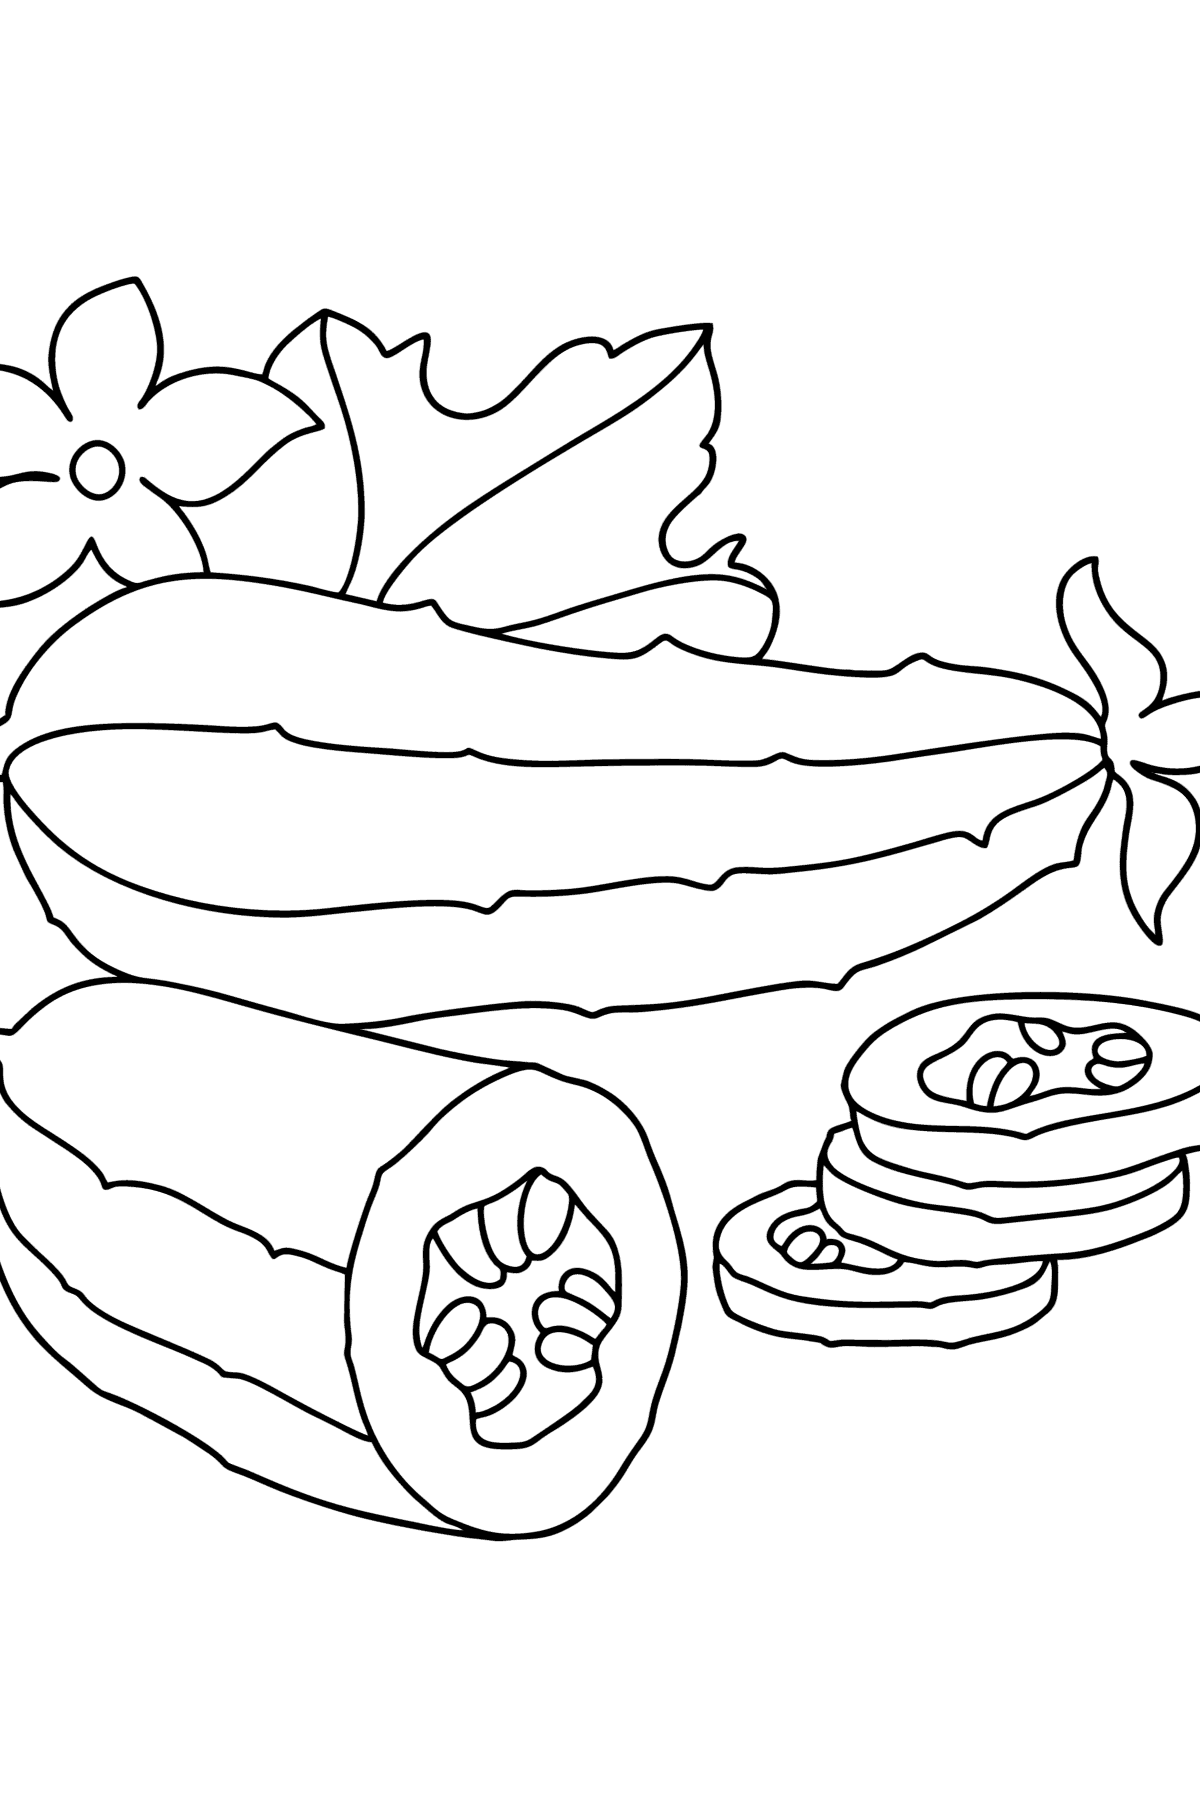 Fresh cucumbers сoloring page - Coloring Pages for Kids